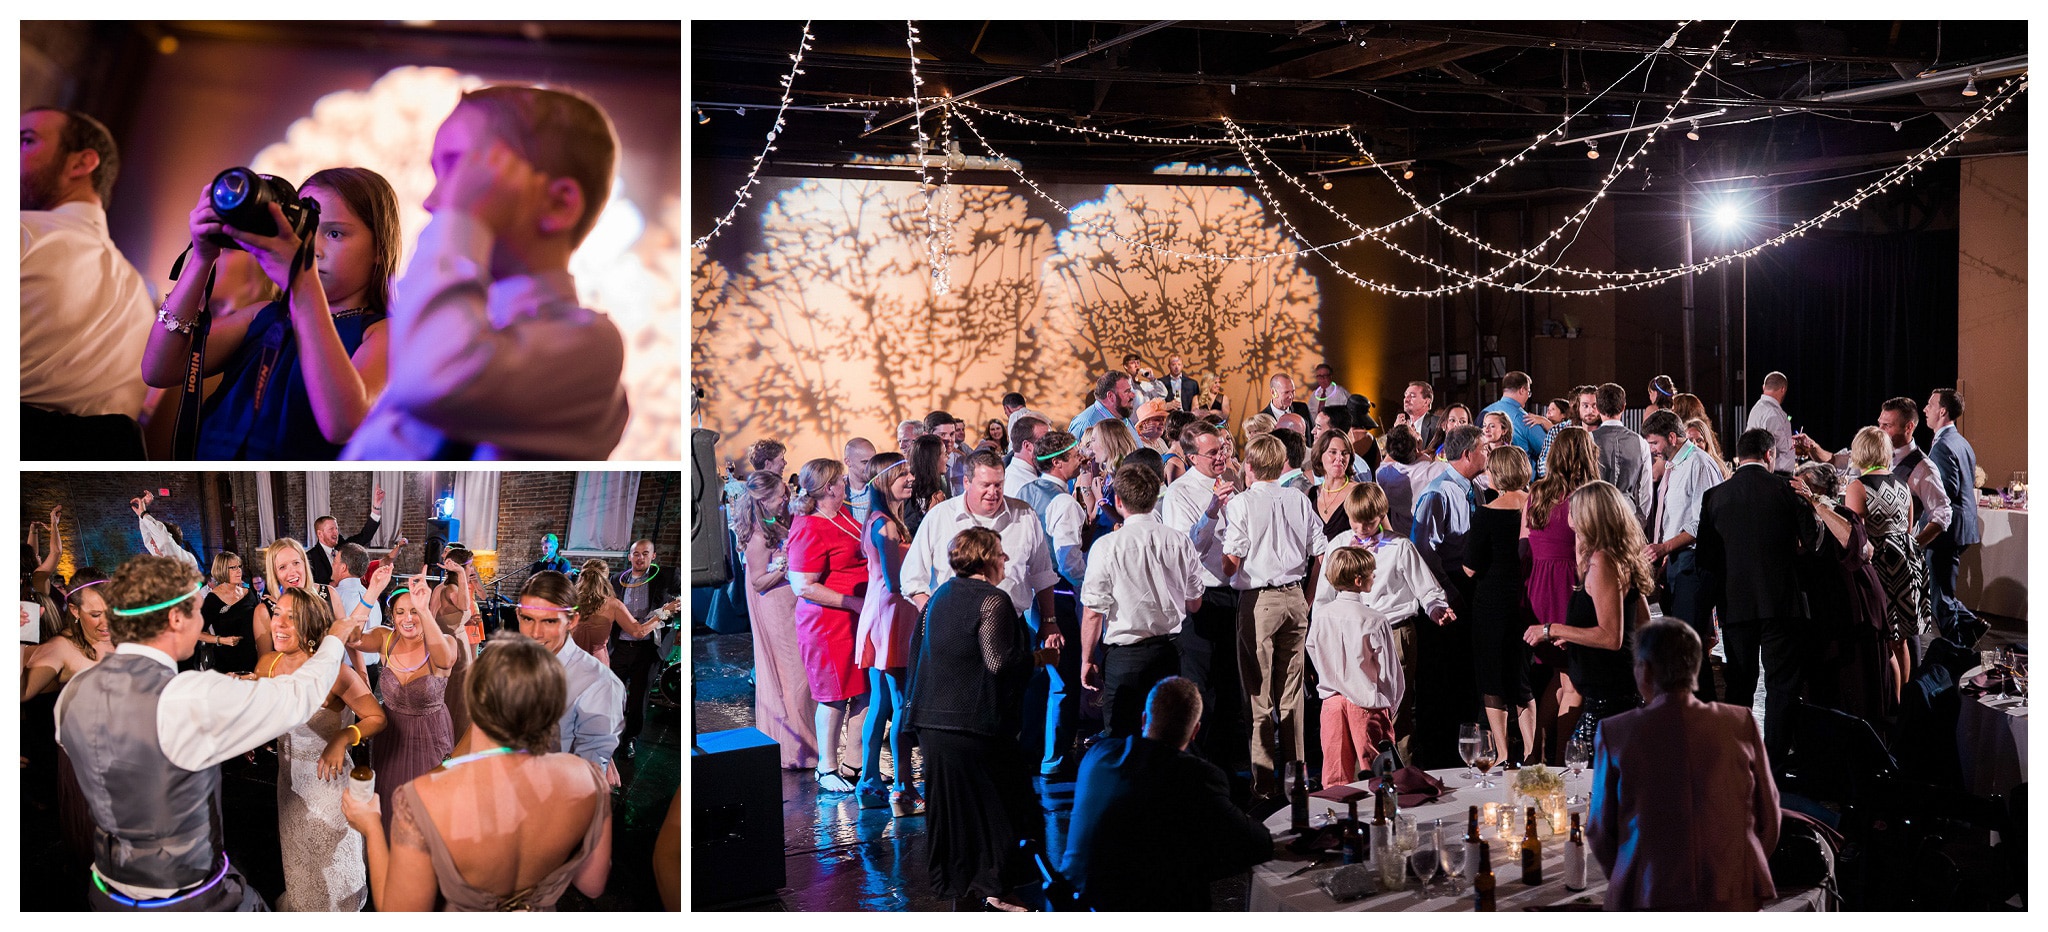 Everyone on the dancefloor with glowsticks - Venue and Catering – King plow Event Gallery and Bold American Events Decor and flowers – Stylish Stems Music and Band – Seven Sharp Nine Transportation – Georgia Trolley Photographer One Life Photography